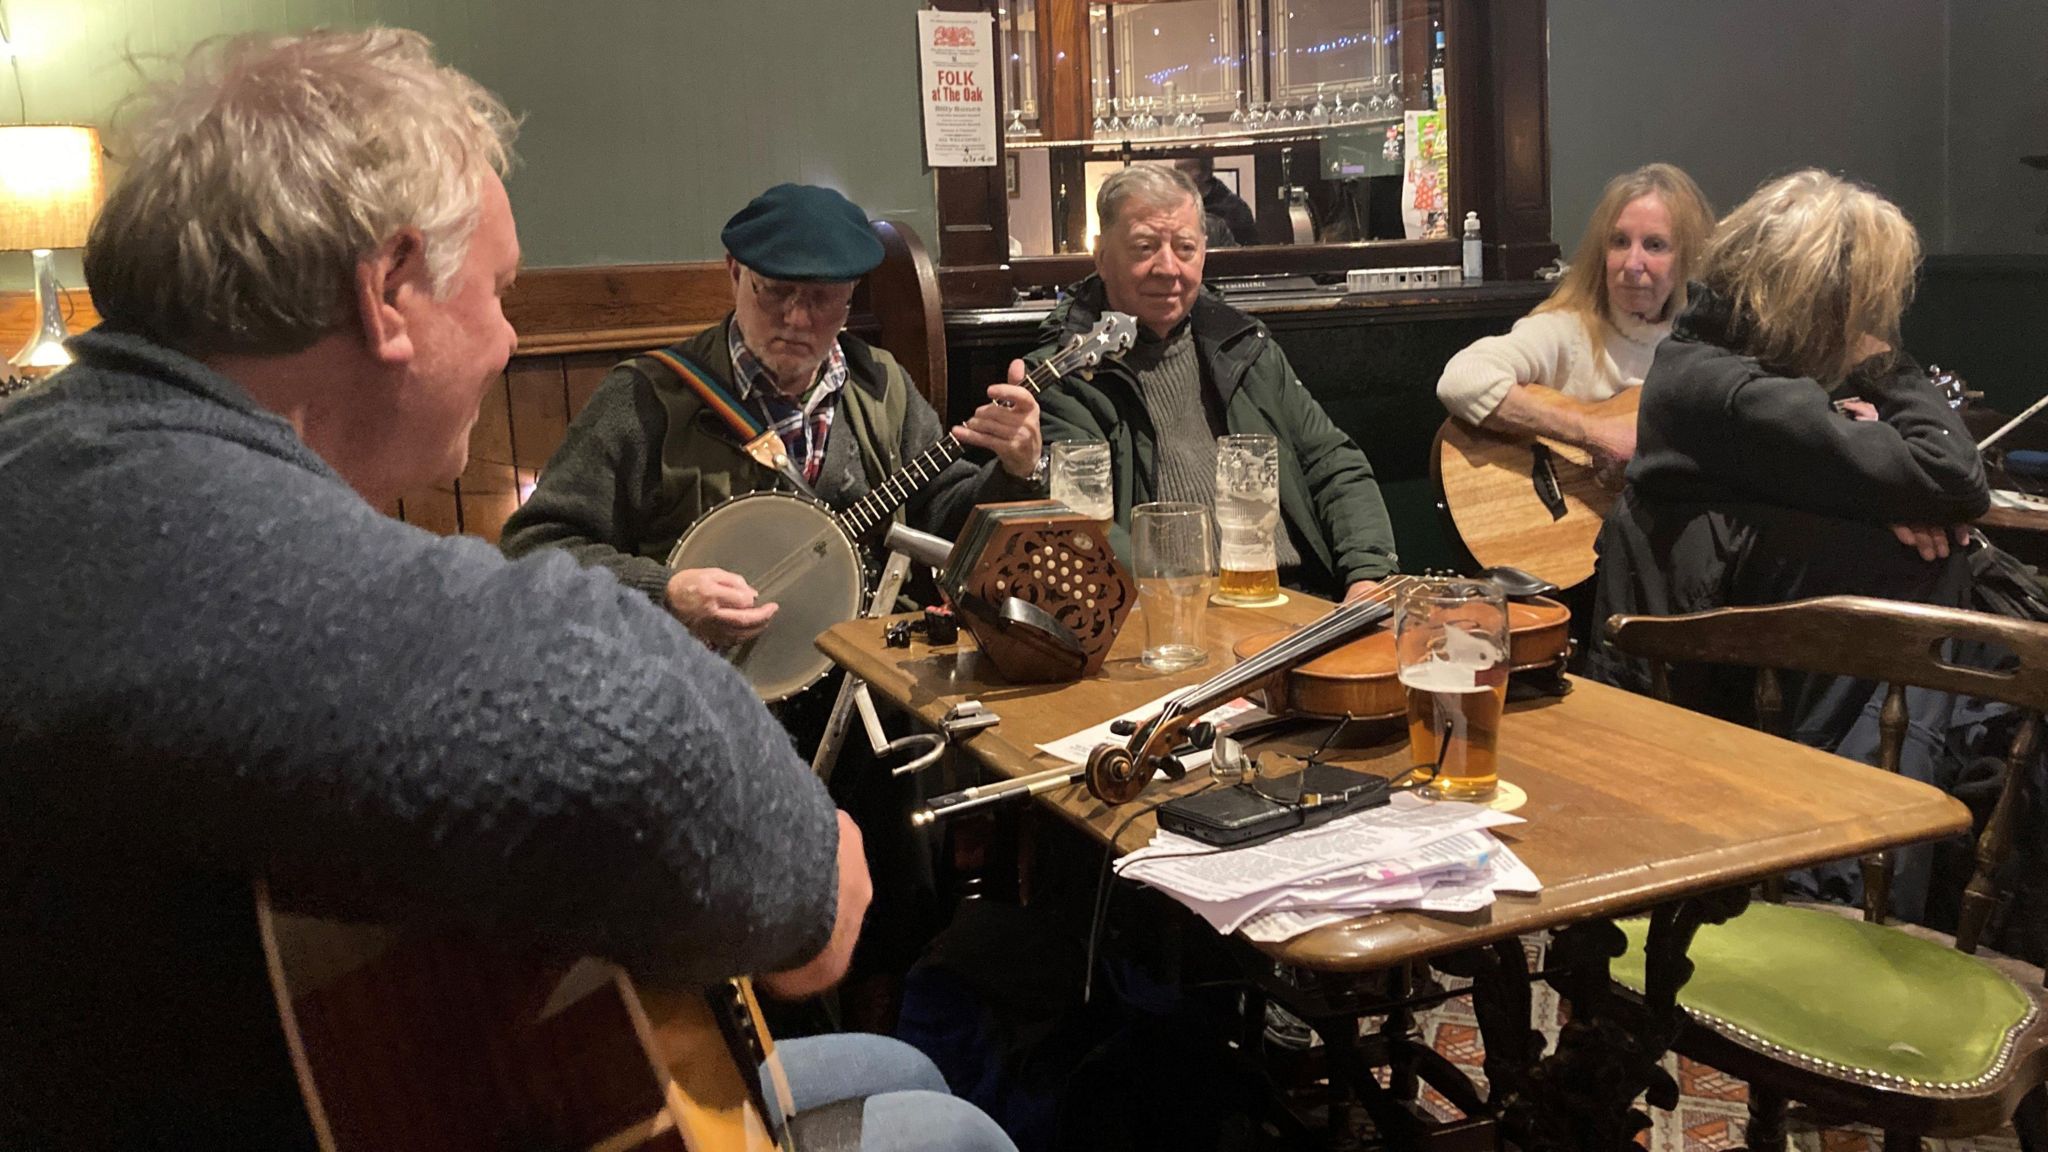 Five people in a pub room with guitars and other instruments